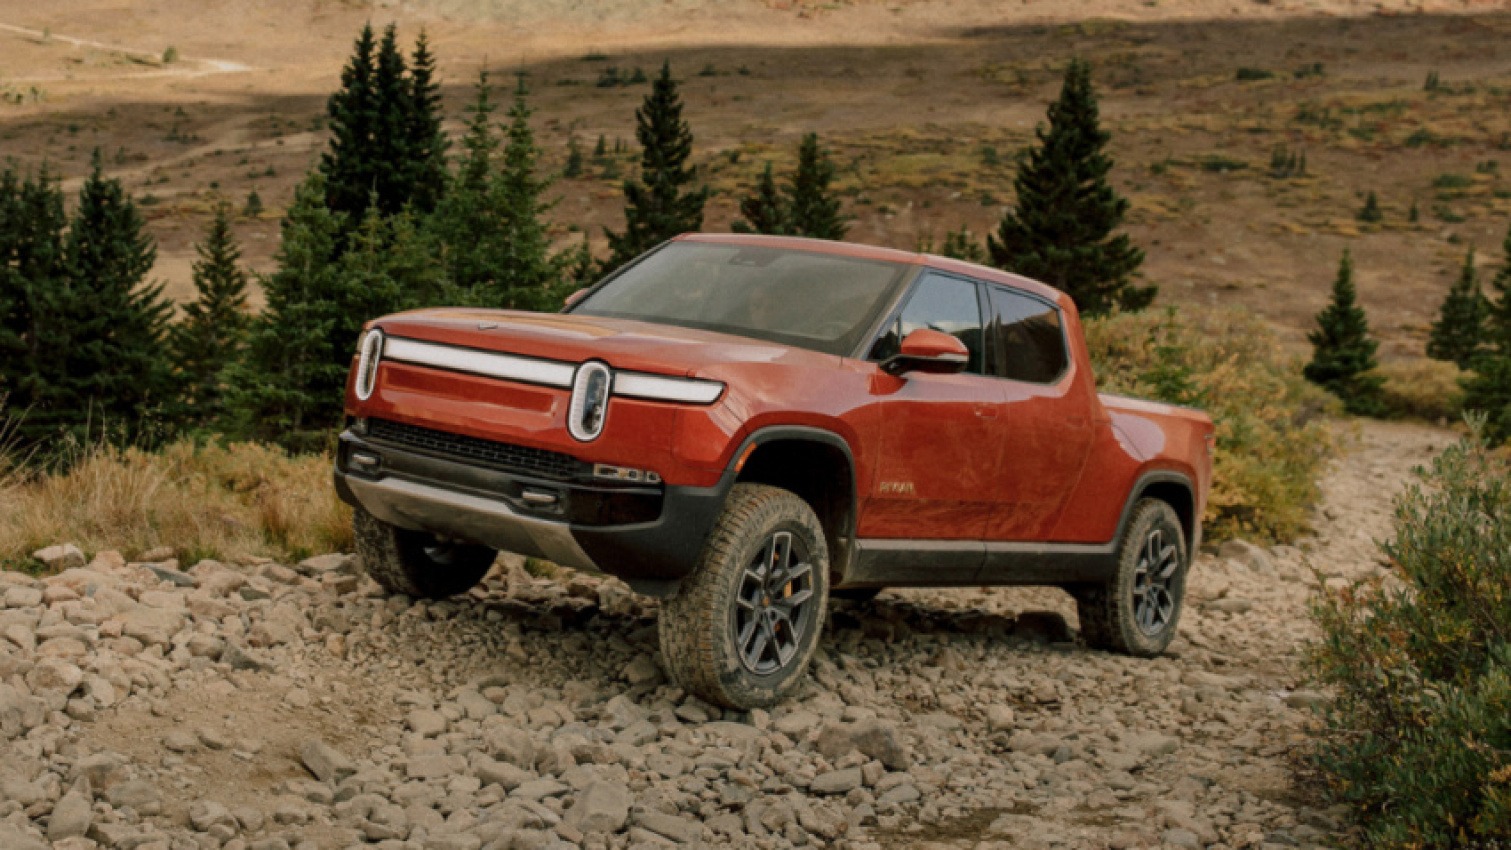 autos, cars, rivian, electric truck, trucks, can the rivian r1t convert traditional pickup truck owners?